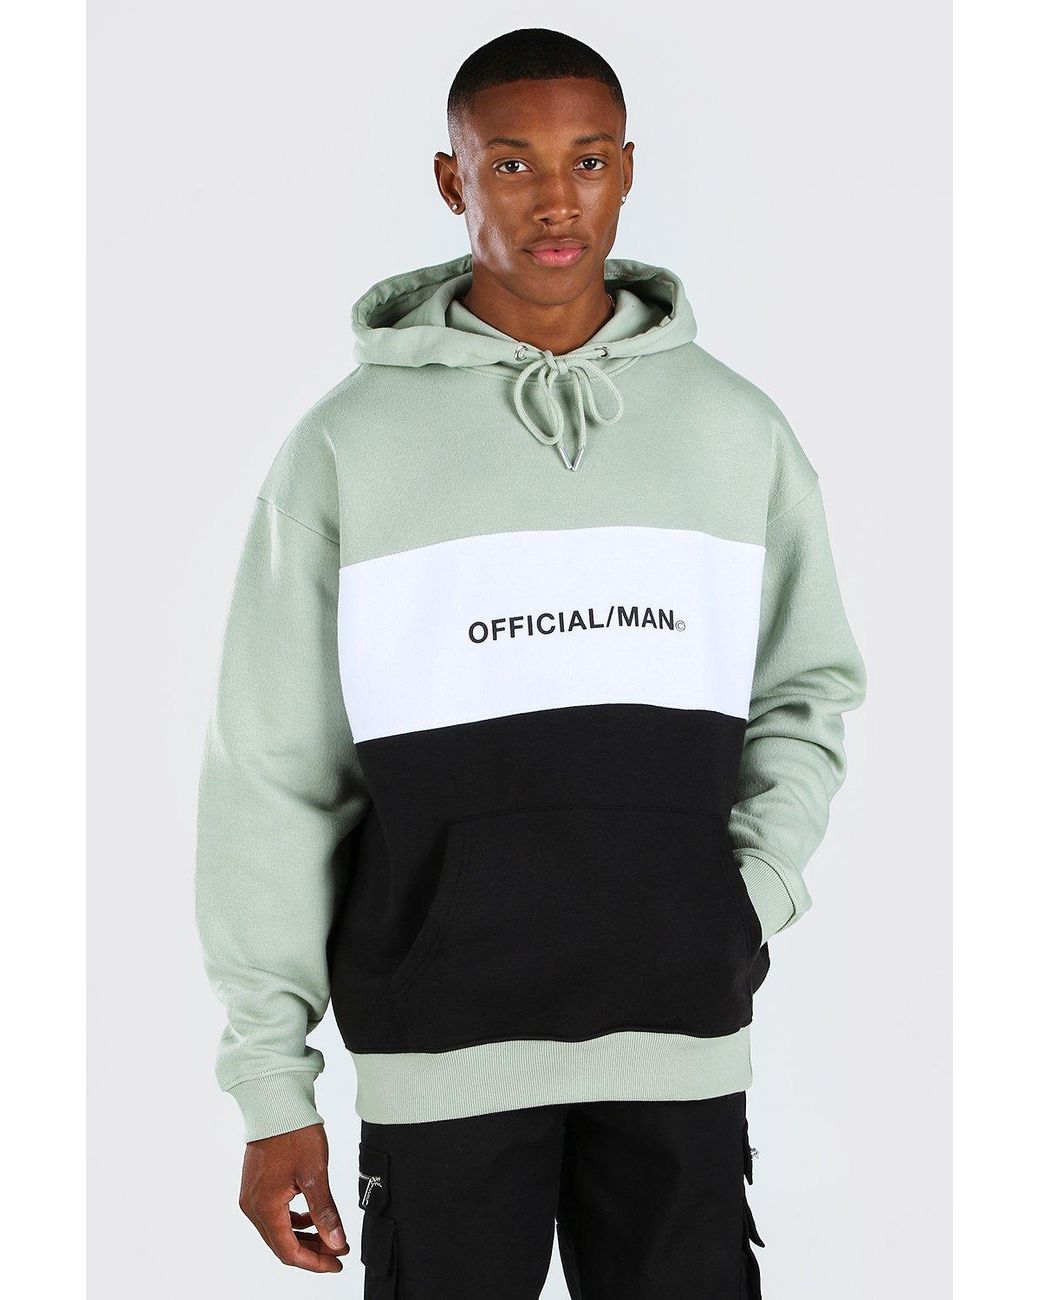 BoohooMAN Official Man Oversized Colour Block Hoodie for Men - Lyst